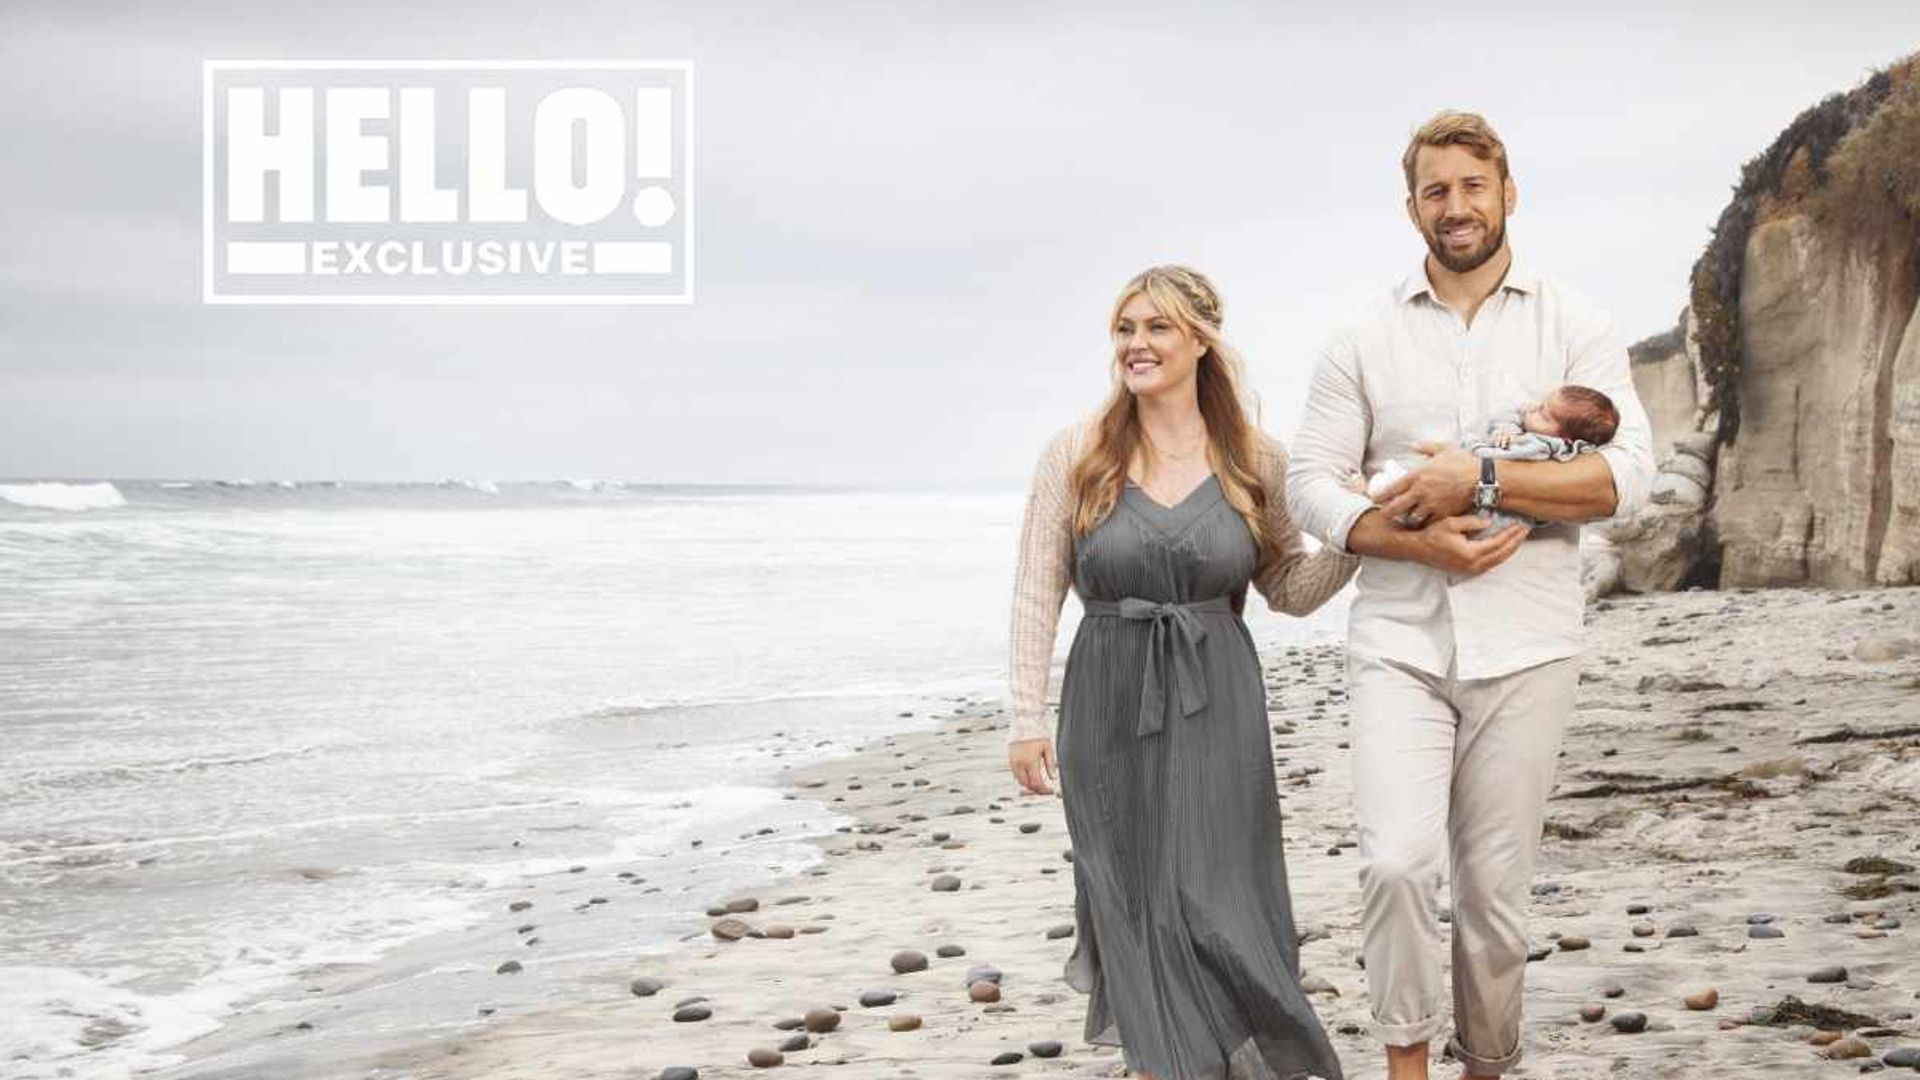 Chris Robshaw and Camilla Kerslake introduce baby boy and reveal his name